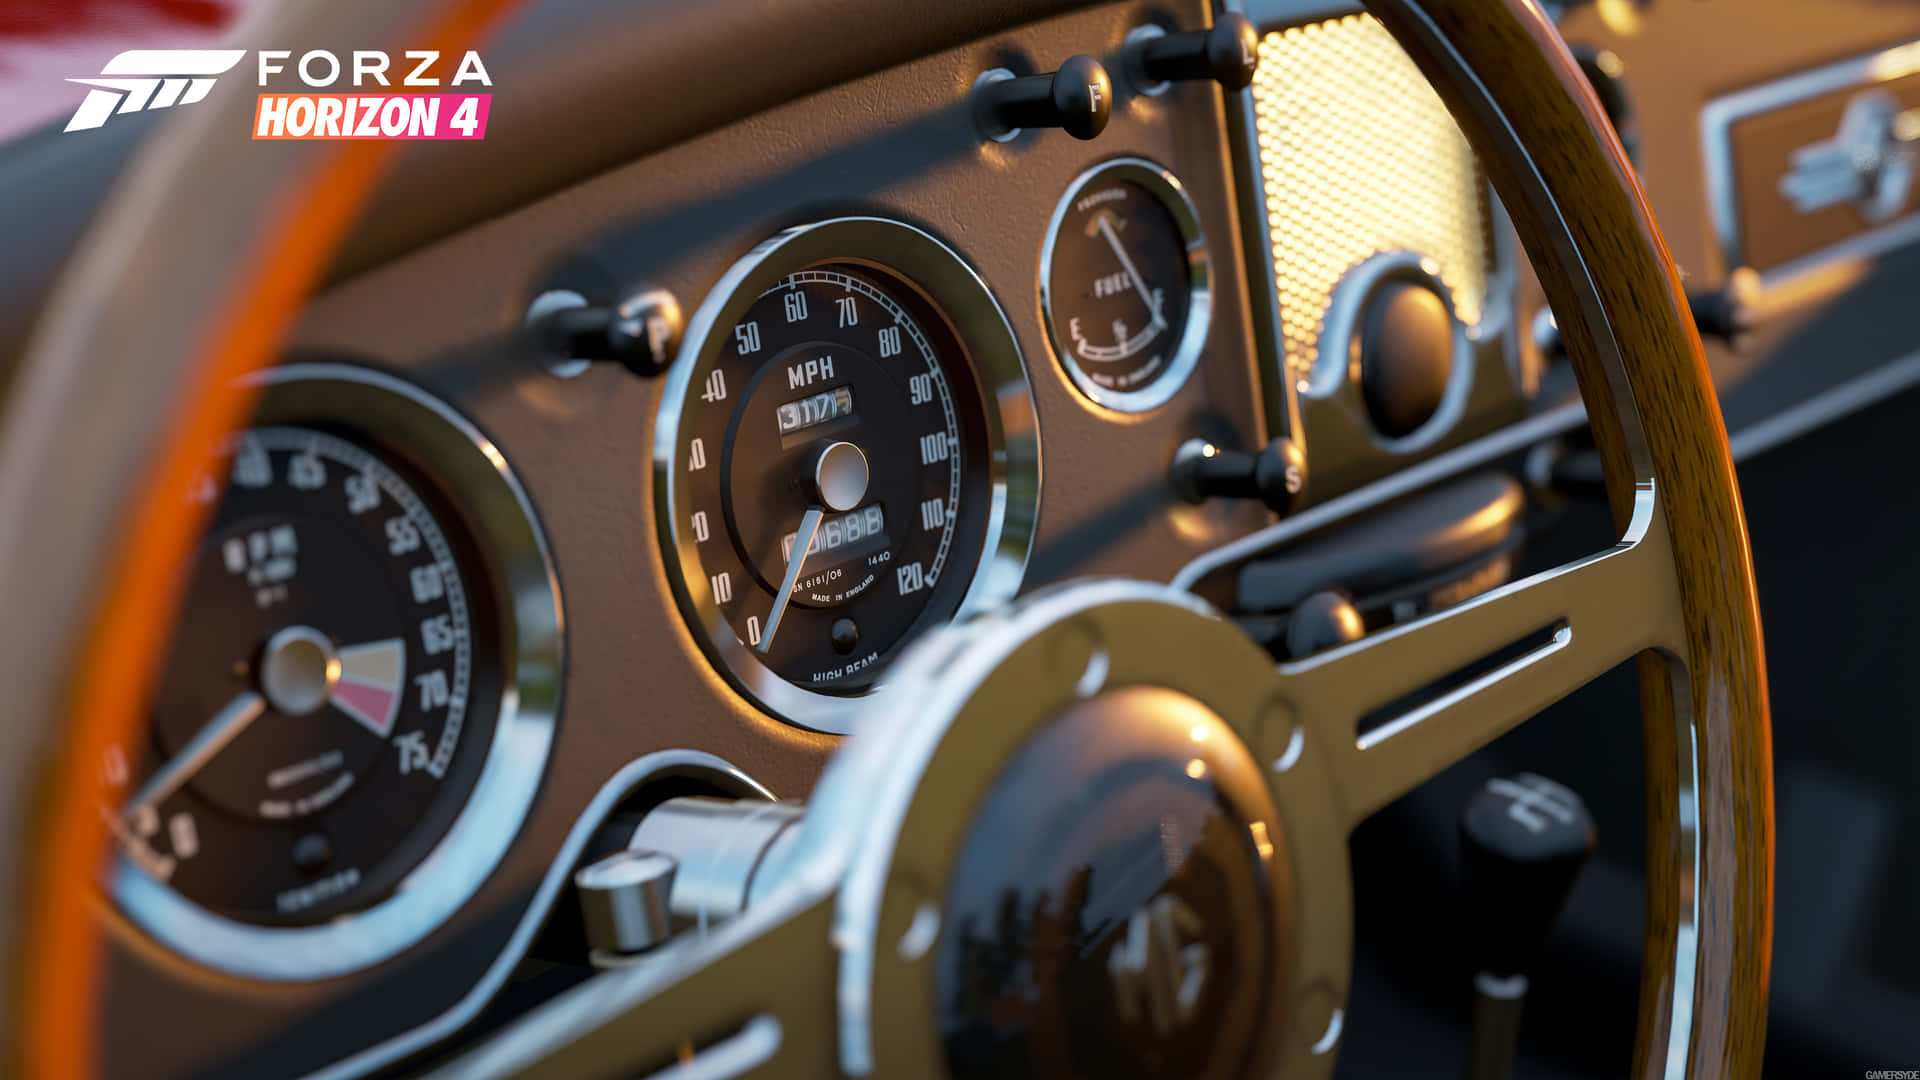 The Dashboard Of A Classic Car In The Game Wallpaper